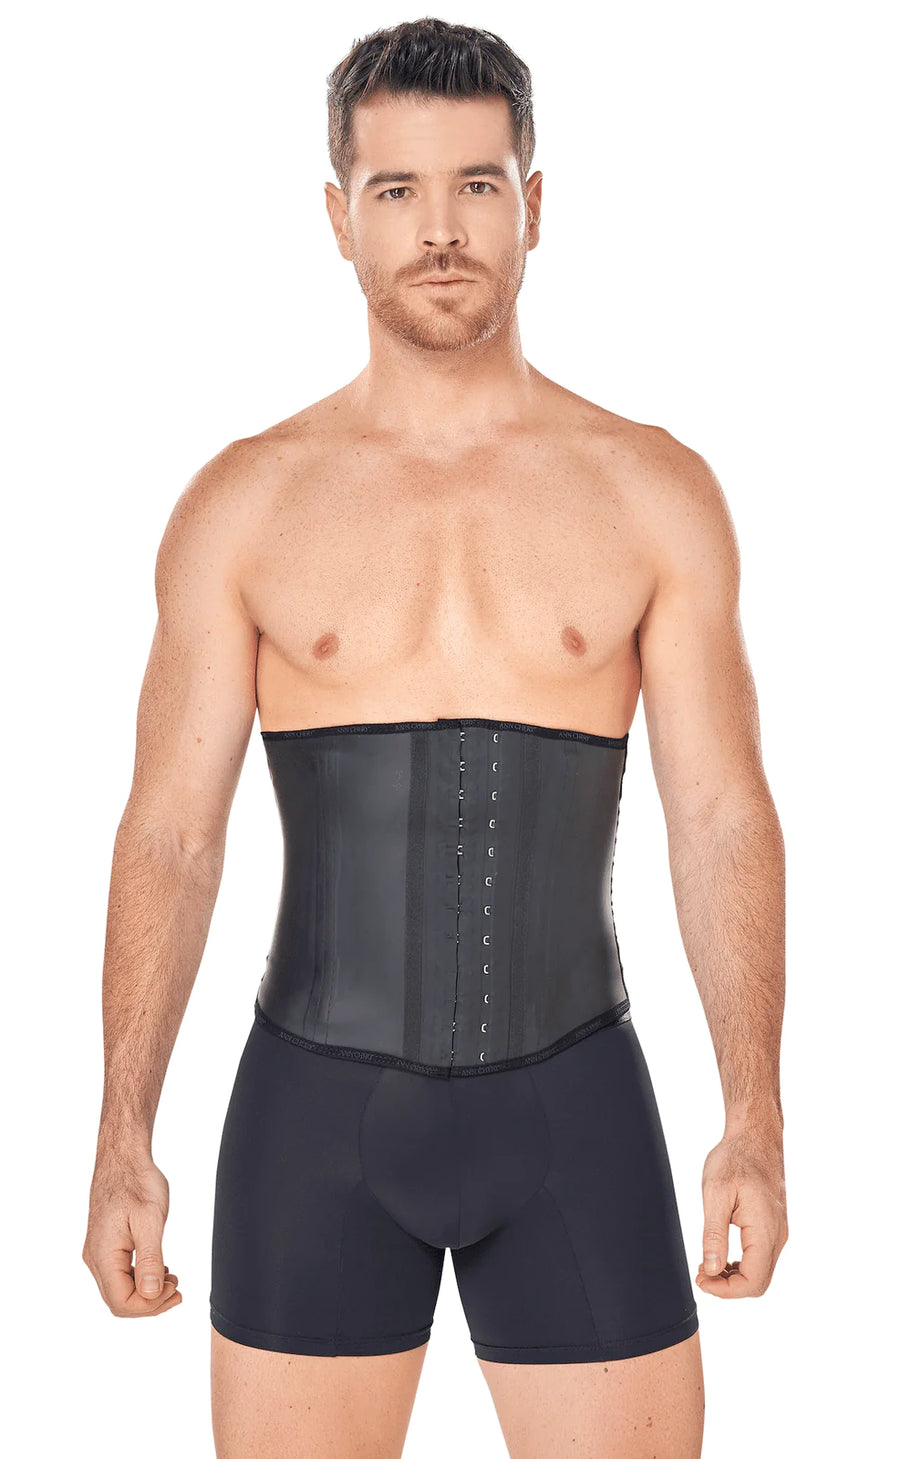 Eyelet Latex Superfit magicwear workout shape - Shapes By Mena